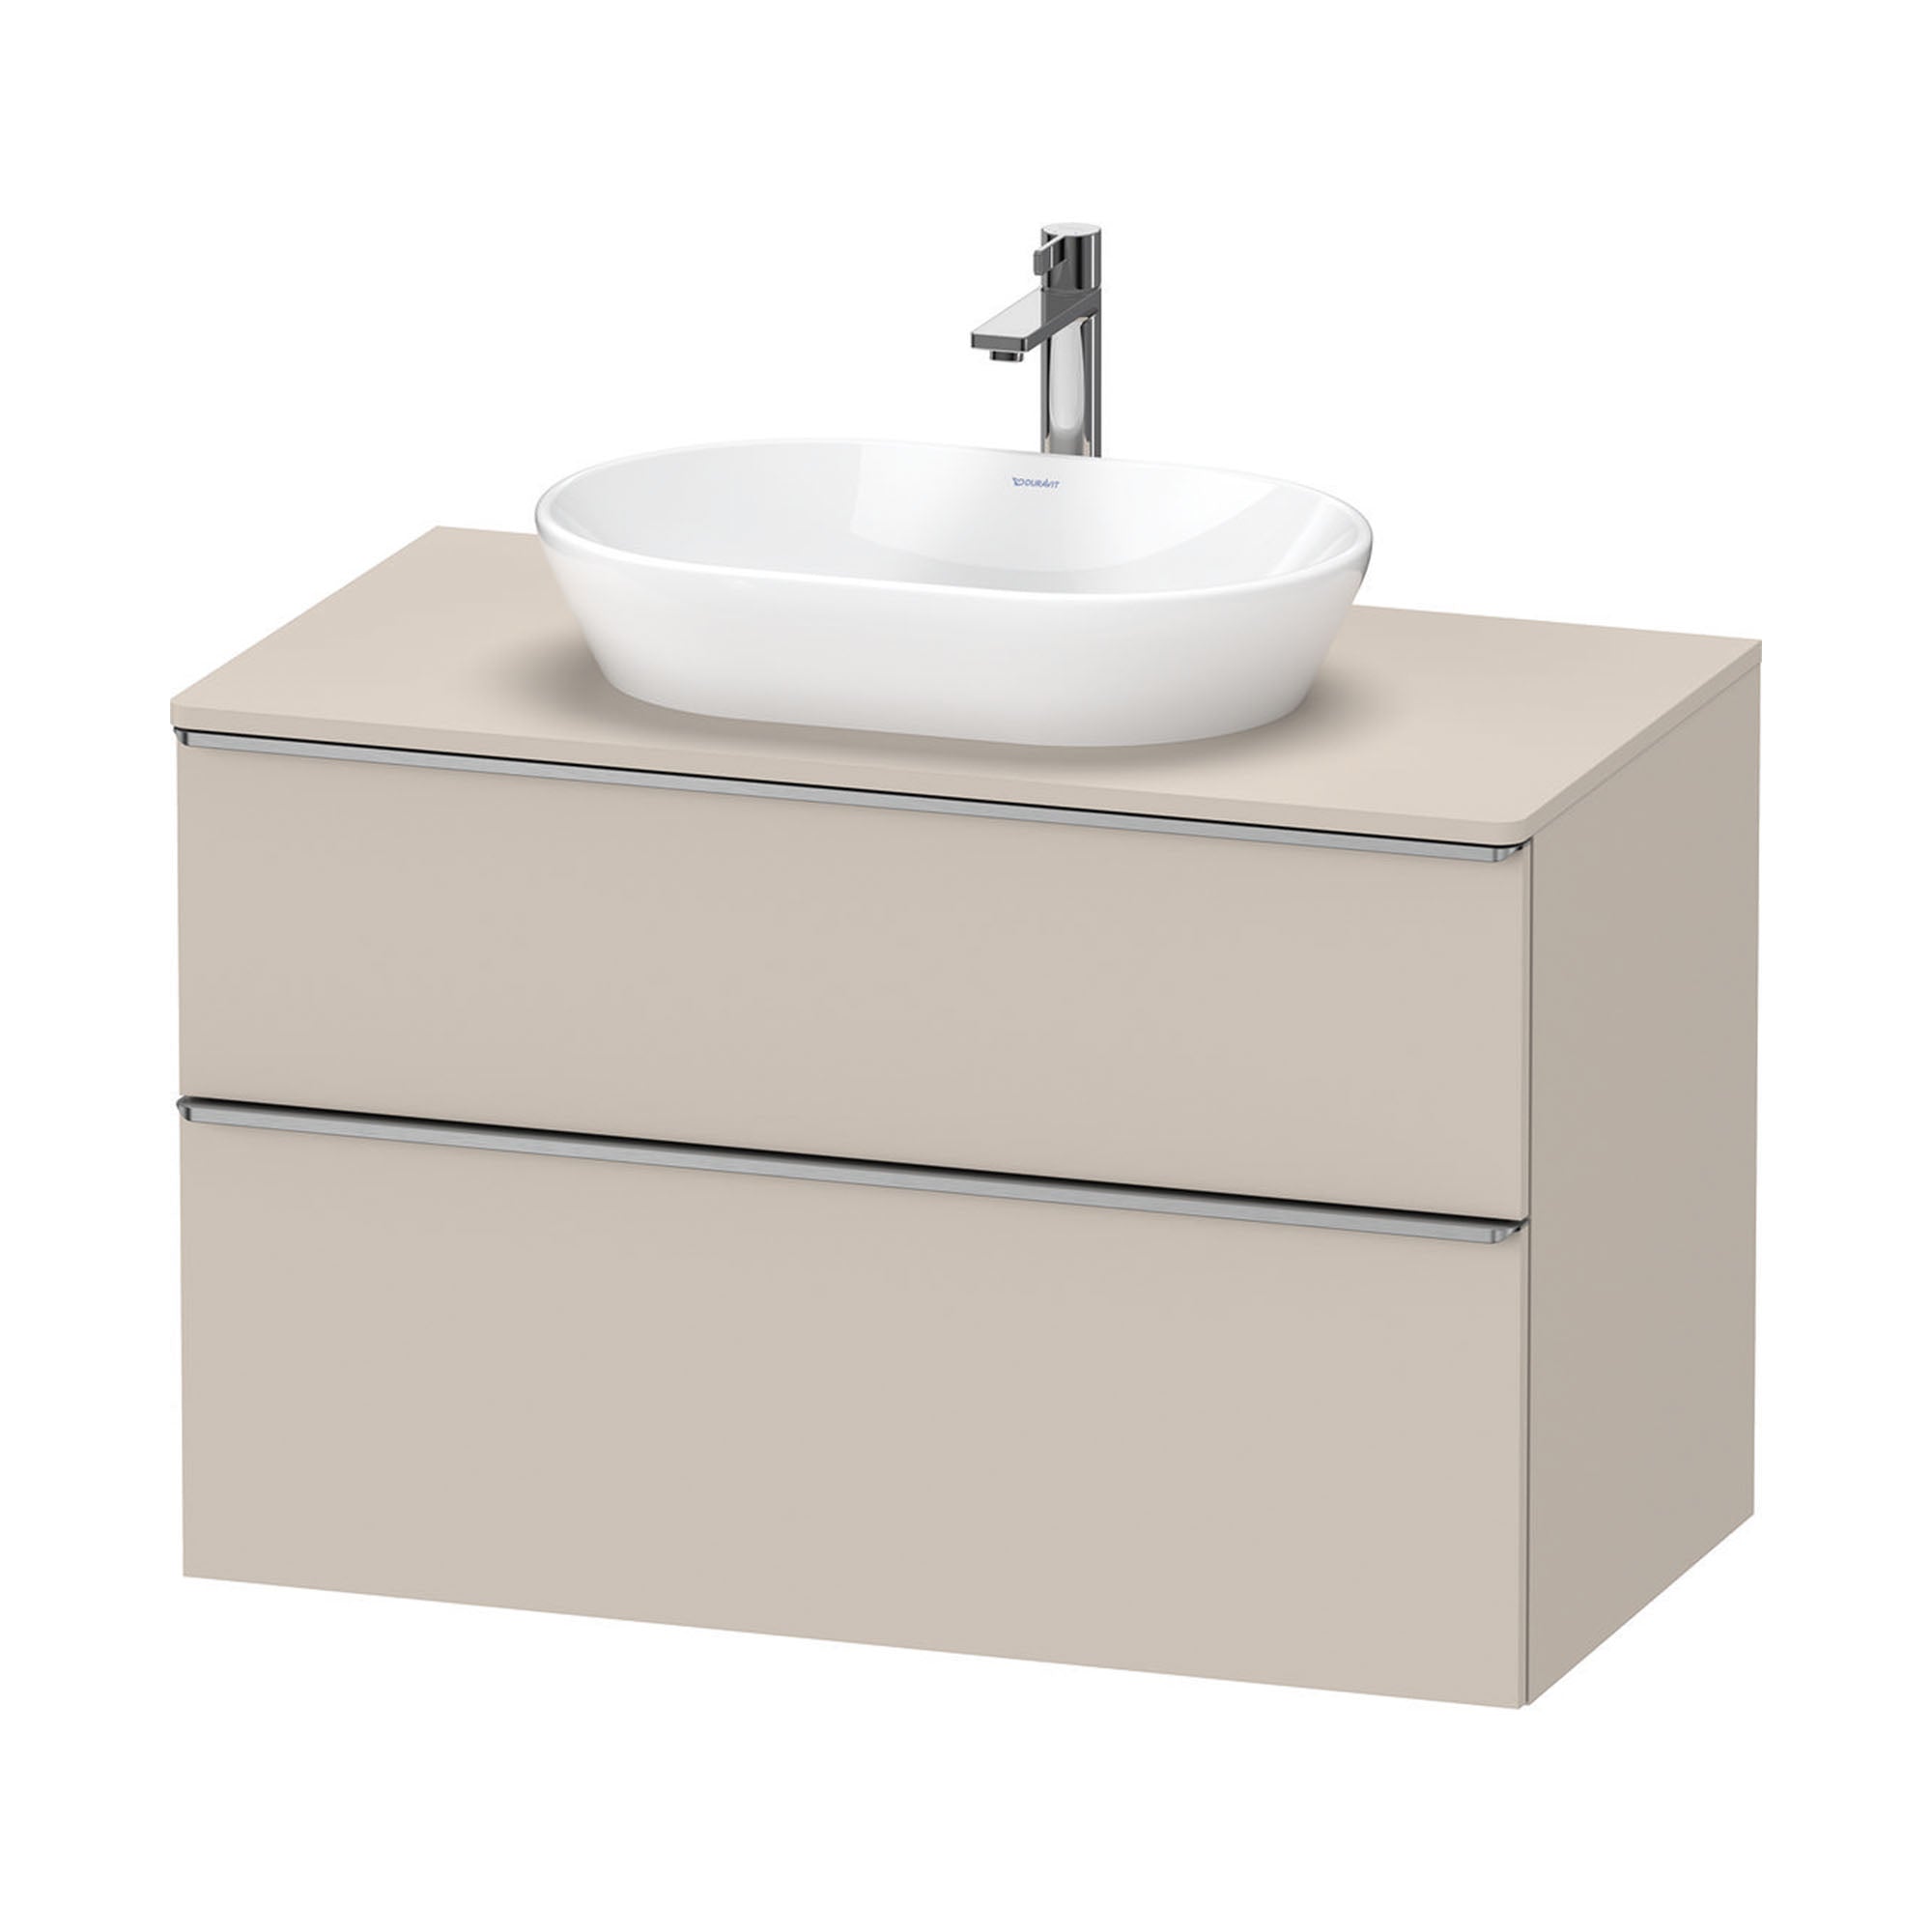 duravit d-neo 1000 wall mounted vanity unit with worktop taupe stainless steel handles